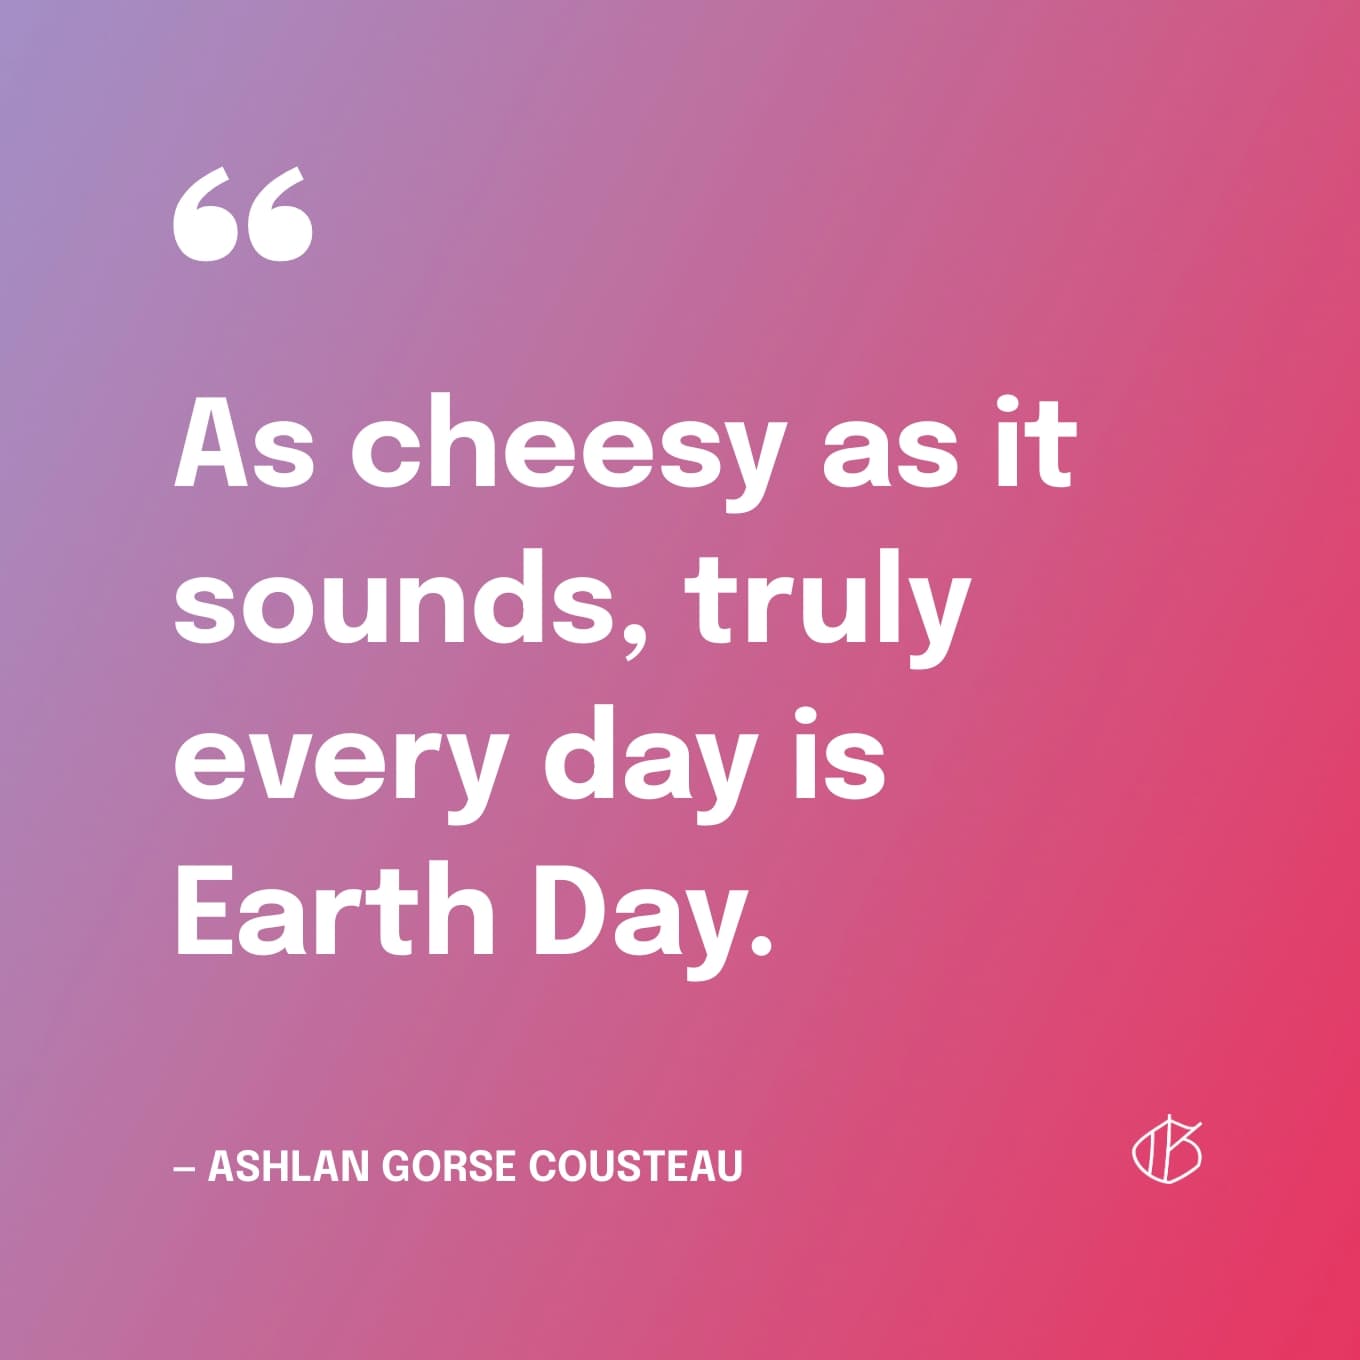 “As cheesy as it sounds, truly every day is Earth Day.” — Ashlan Gorse Cousteau